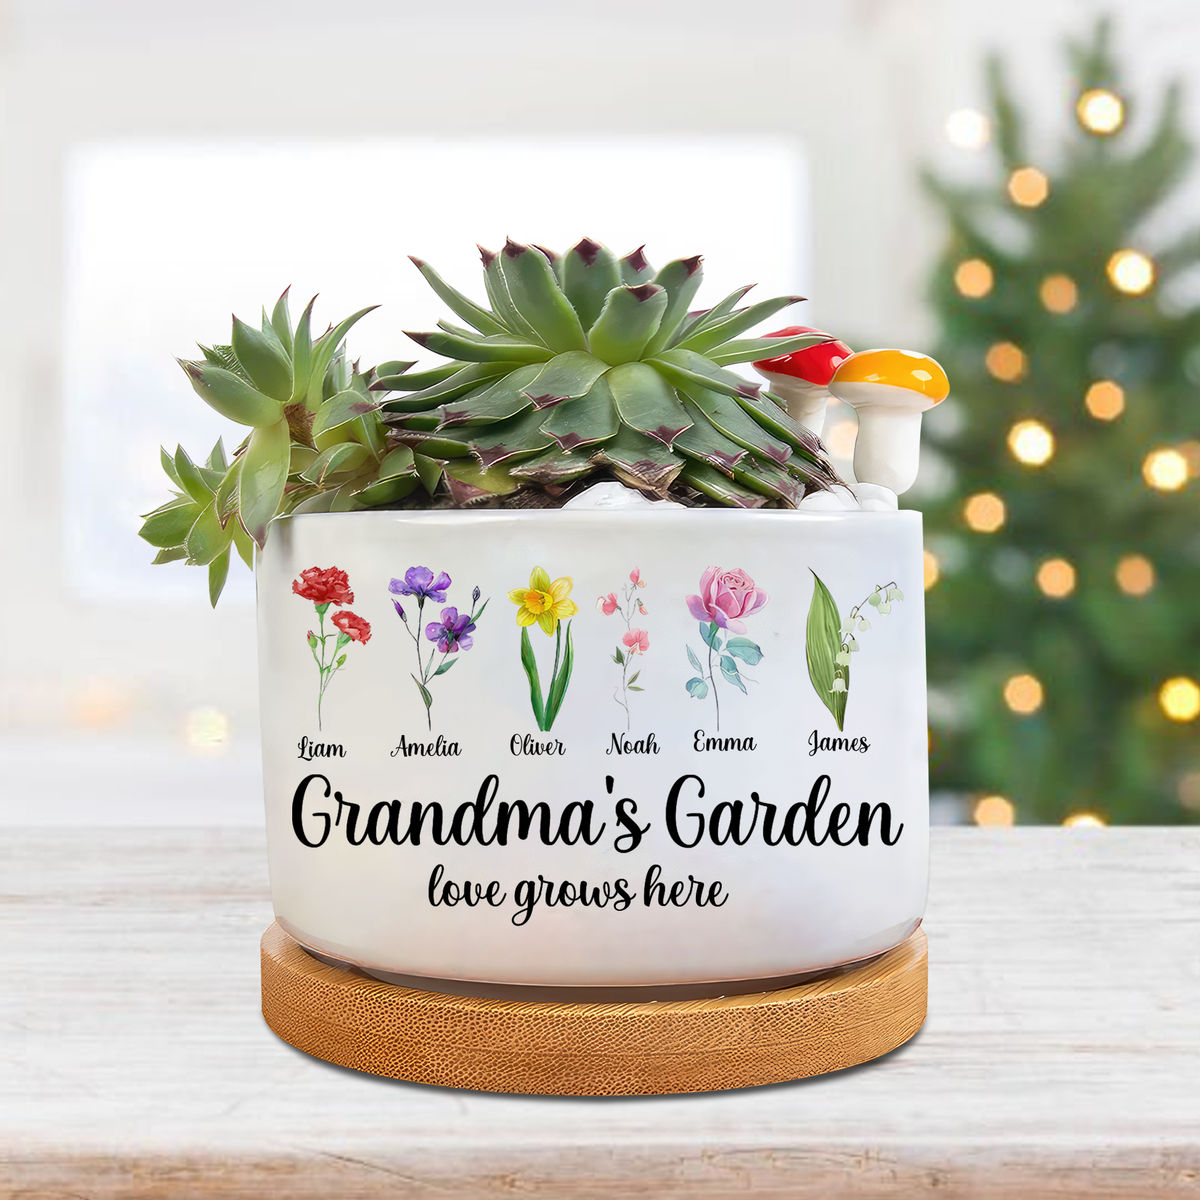 Mother's Day Gift - Personalized Grandma's Love Grows Here Flowers Plant Pot, Mom's Garden Flower Pot, Gift From kids For Mother's Day, Grandma's Birthday Gift 30027_2